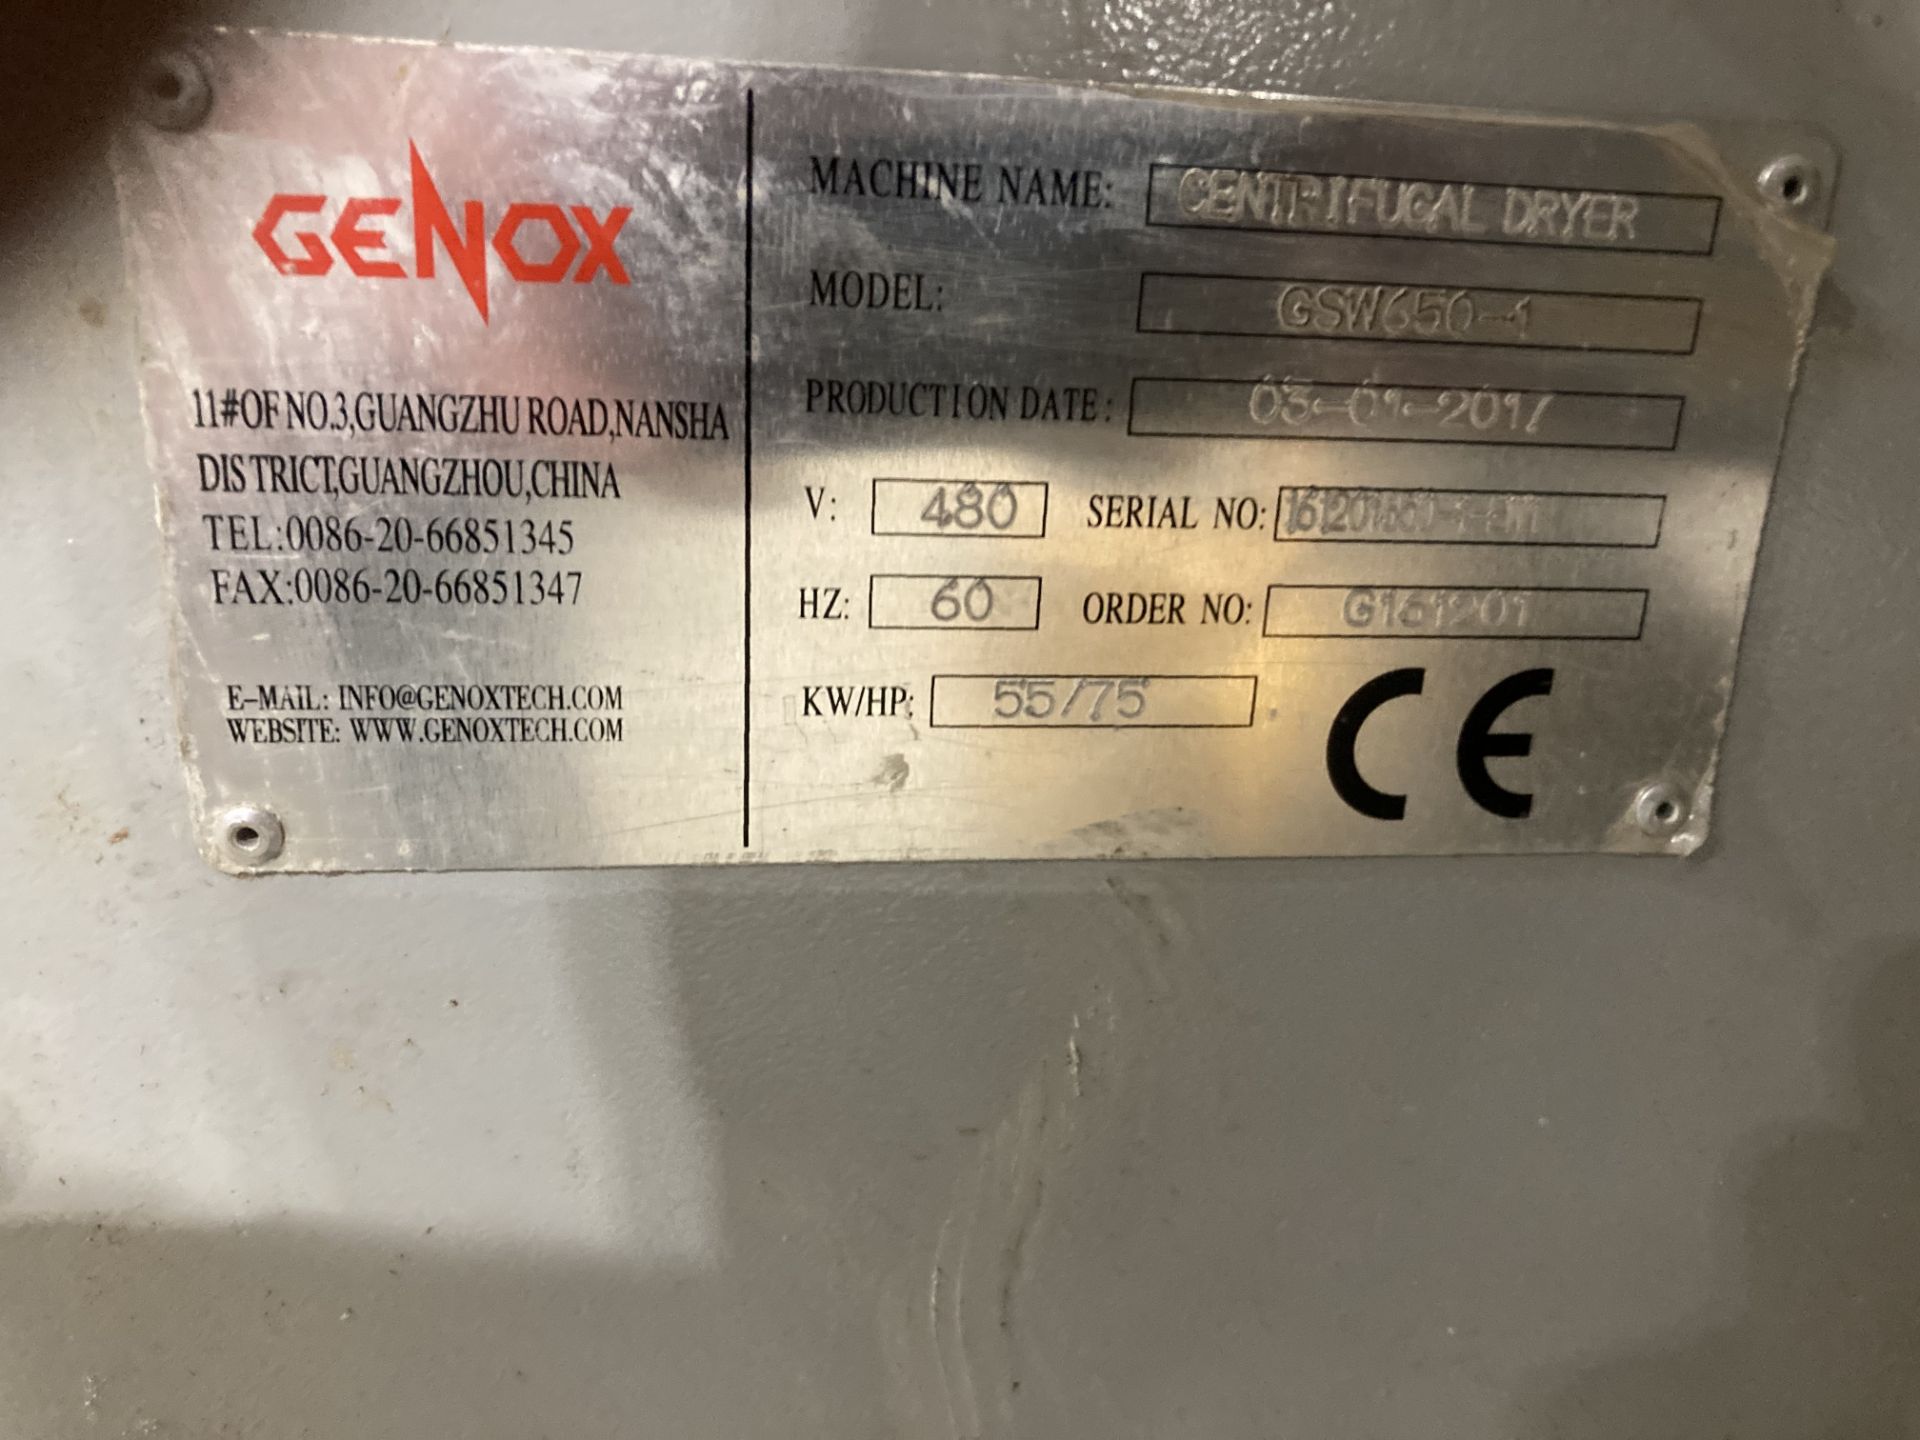 55 KW GENOX MODEL GS650-2 CENTRIFUGAL DRYER; S/N 161201650-2-KY5, 48" DIAMETER X 50", WITH CONTROL - Image 4 of 7